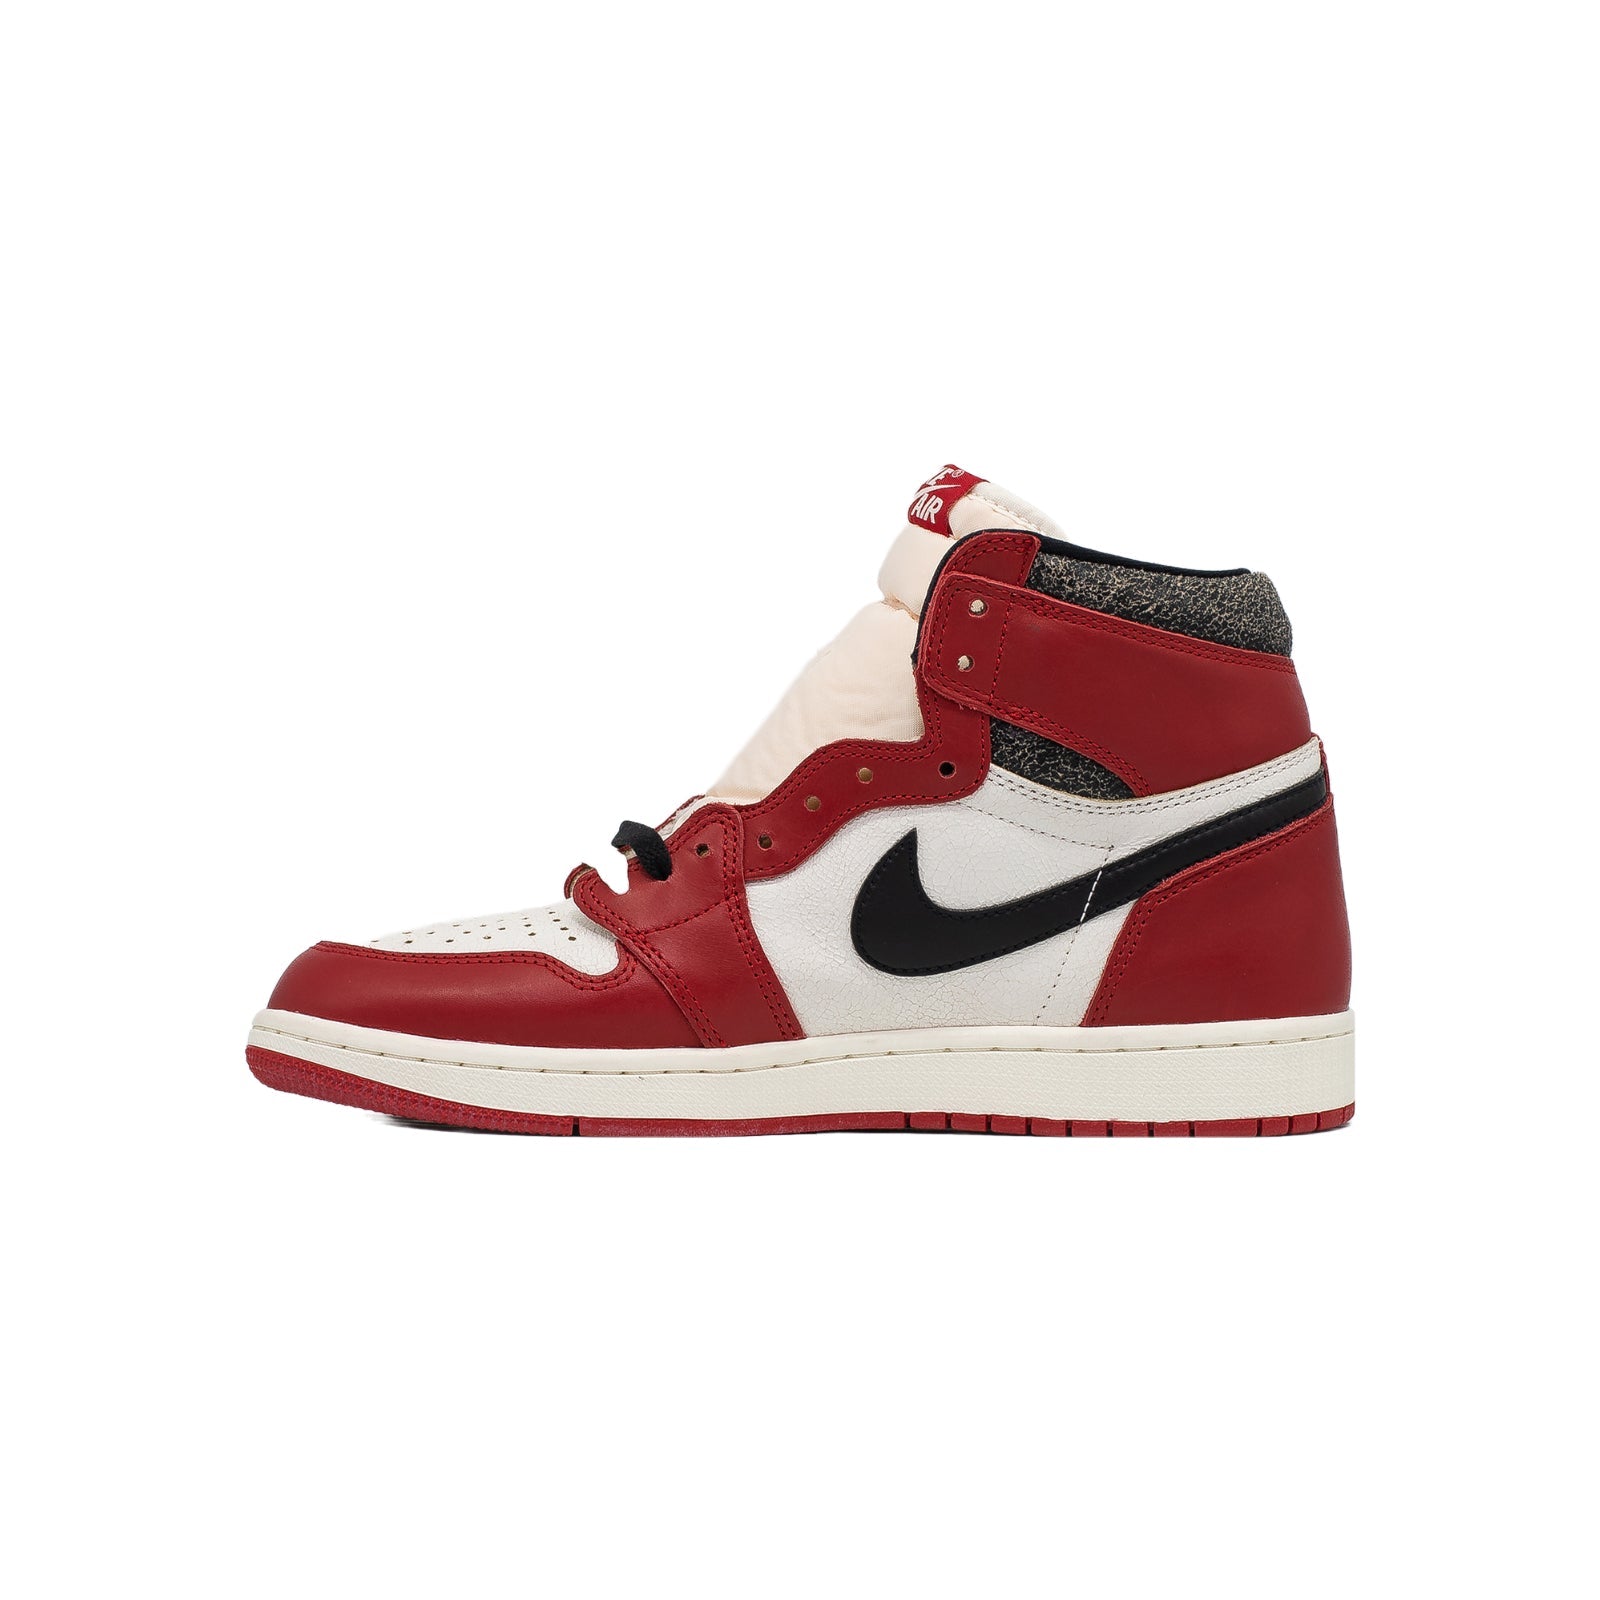 Air Jordan 1 High, Chicago Lost and Found